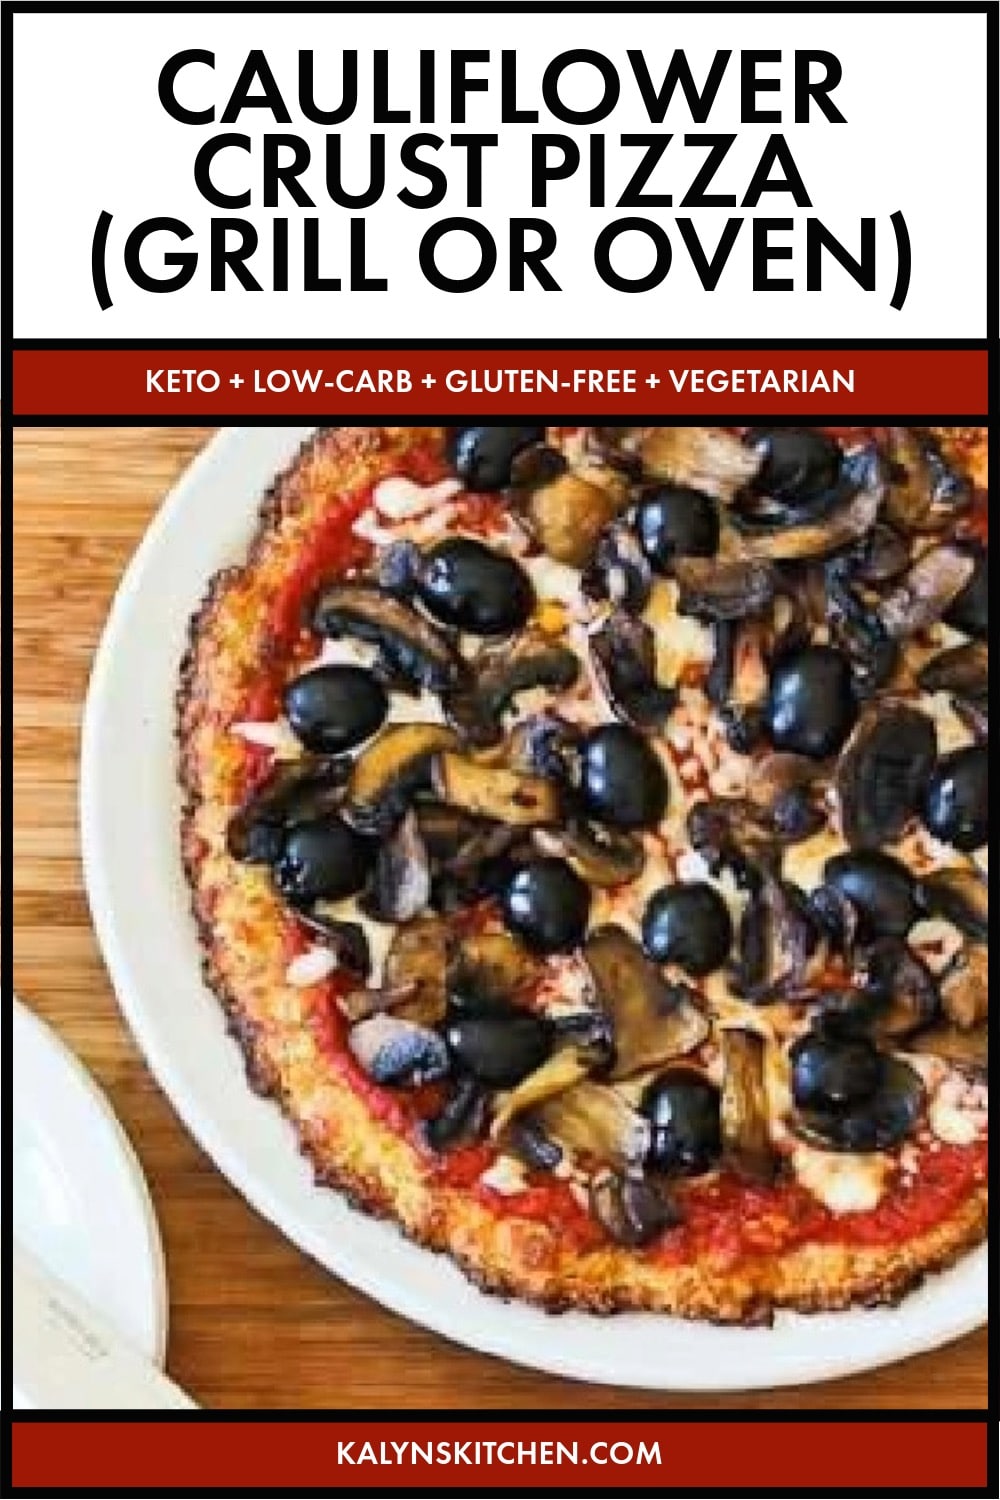 Pinterest image of Cauliflower Crust Pizza (Grill or Oven)